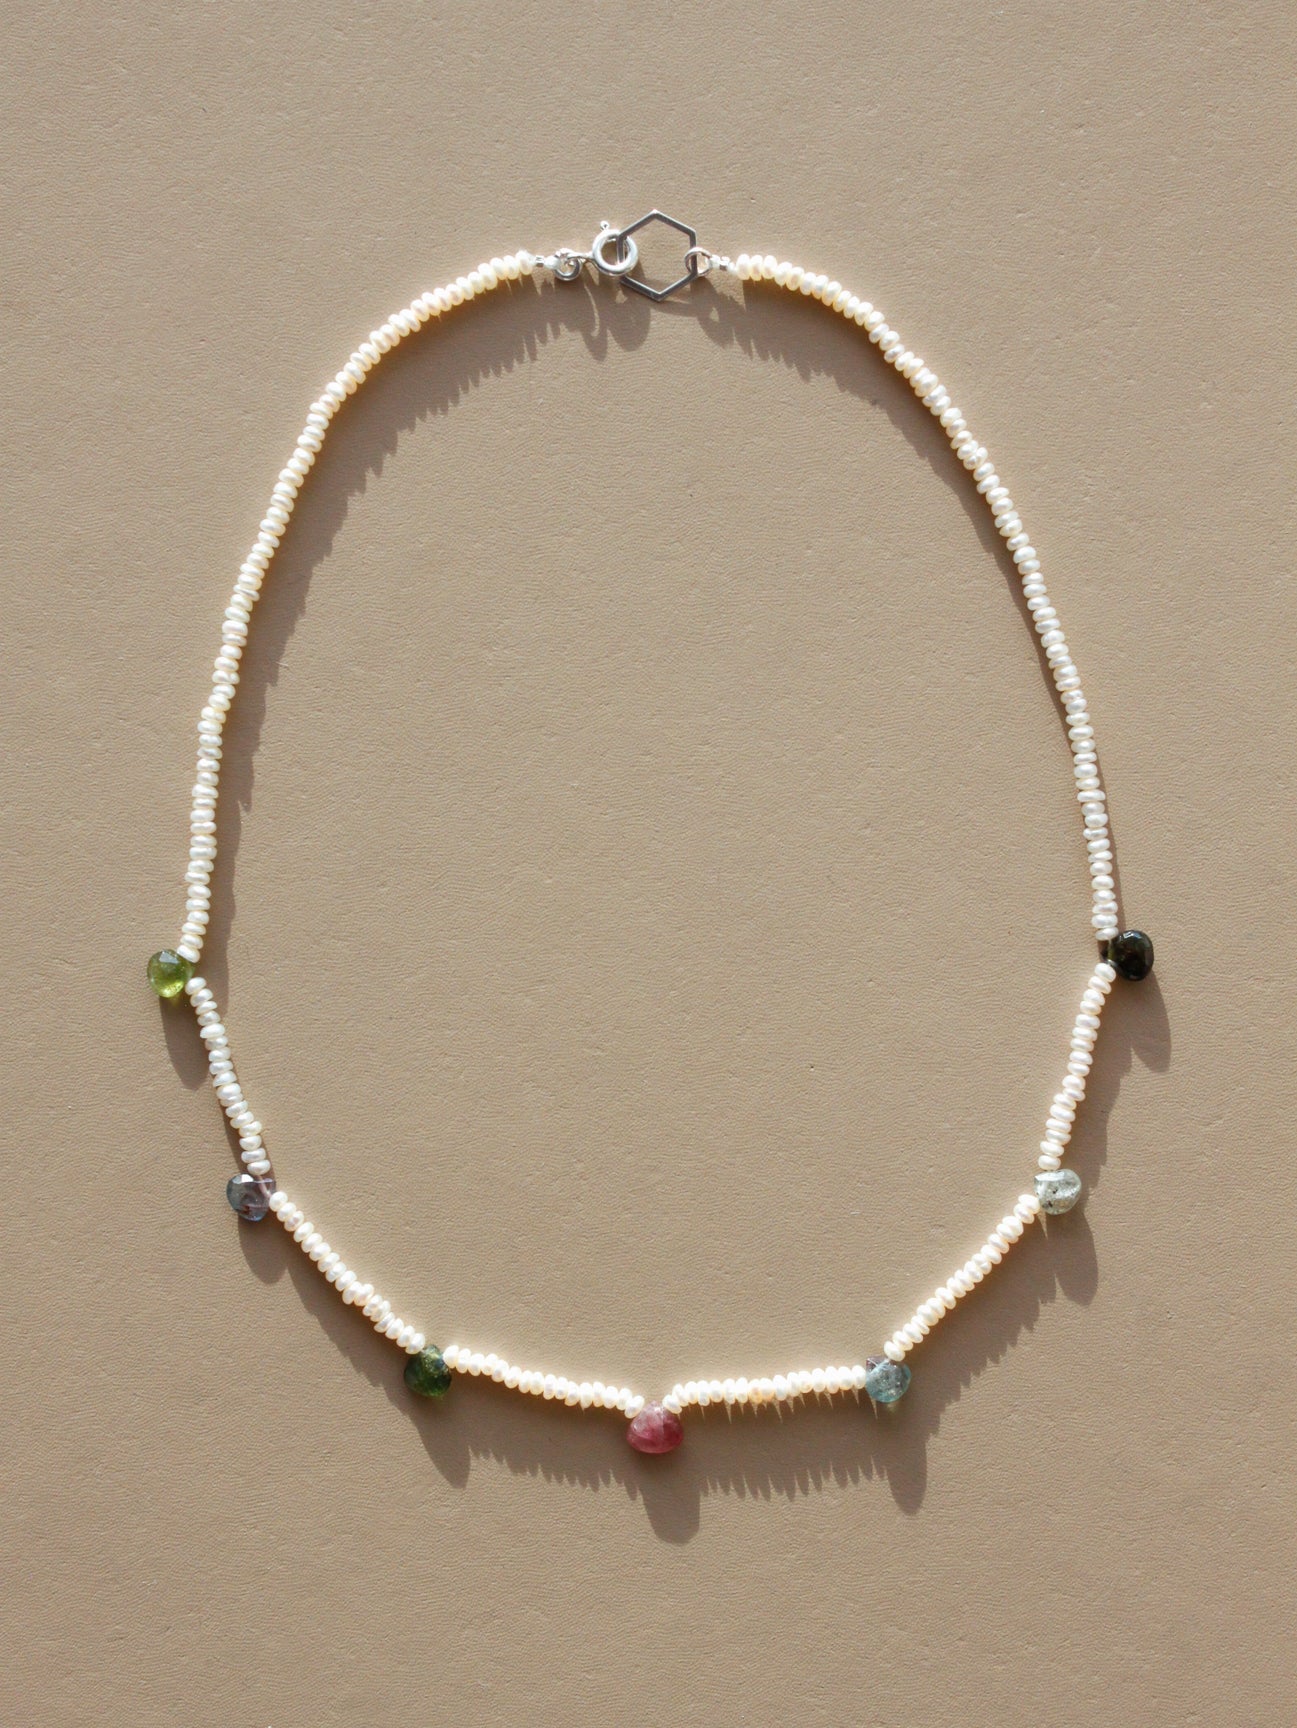 Stone Necklace - Seed Pearls and Tourmalines